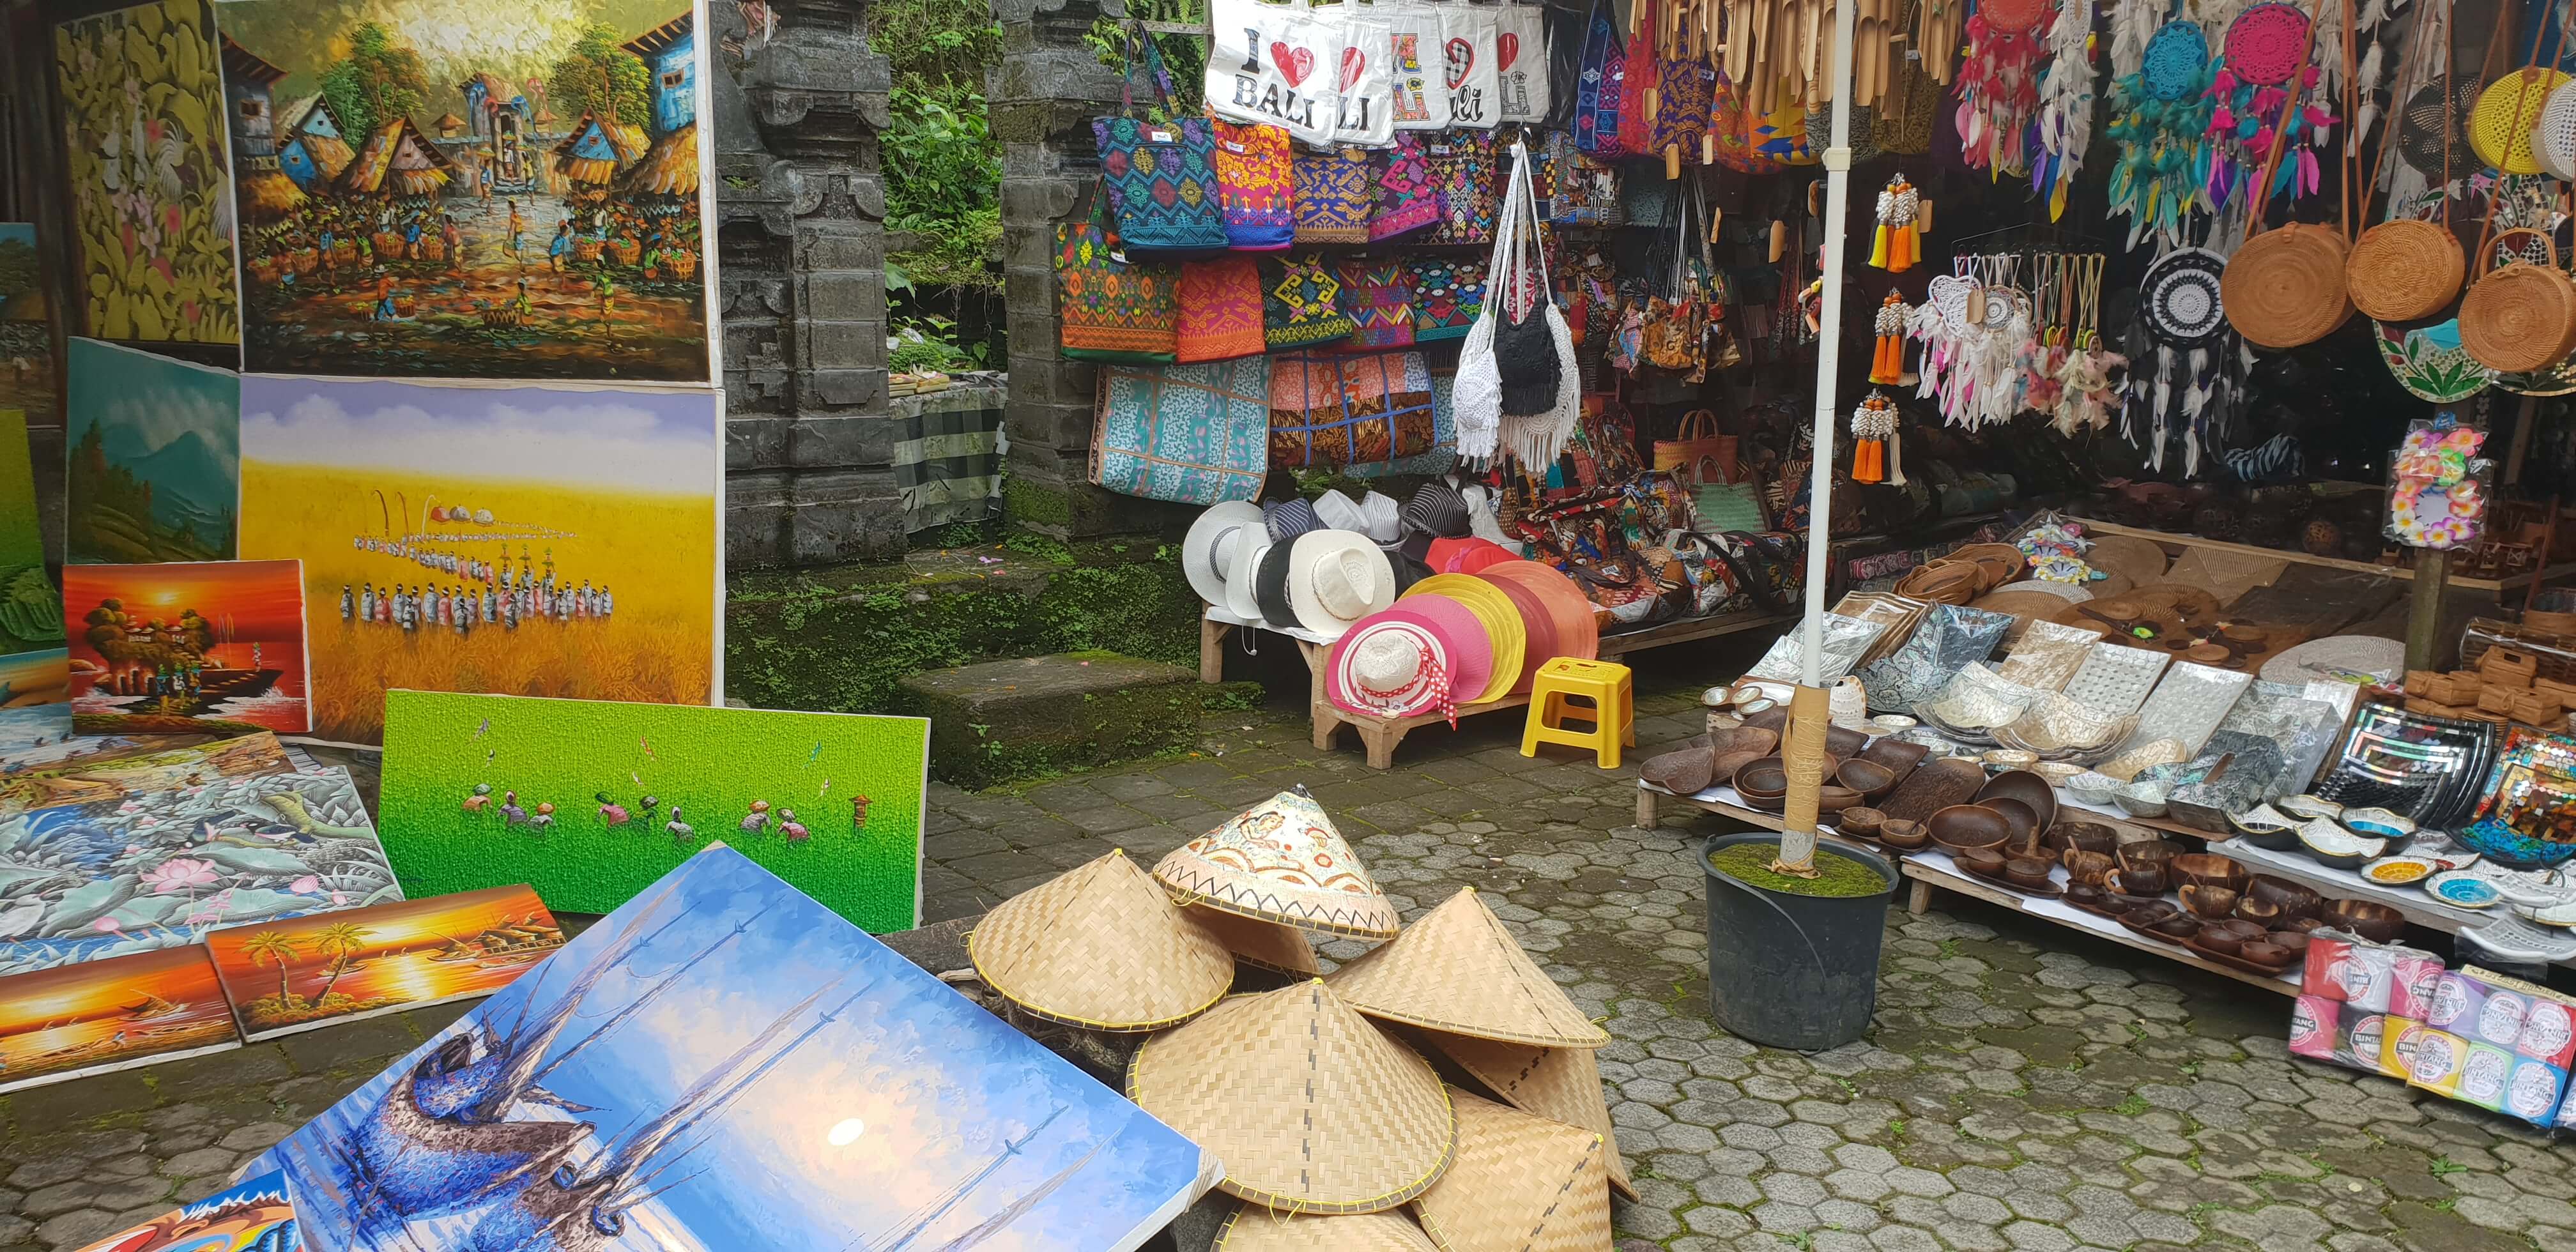 Sellers increase the rate of the items by 3 times on seeing tourists so use your bargaining skills